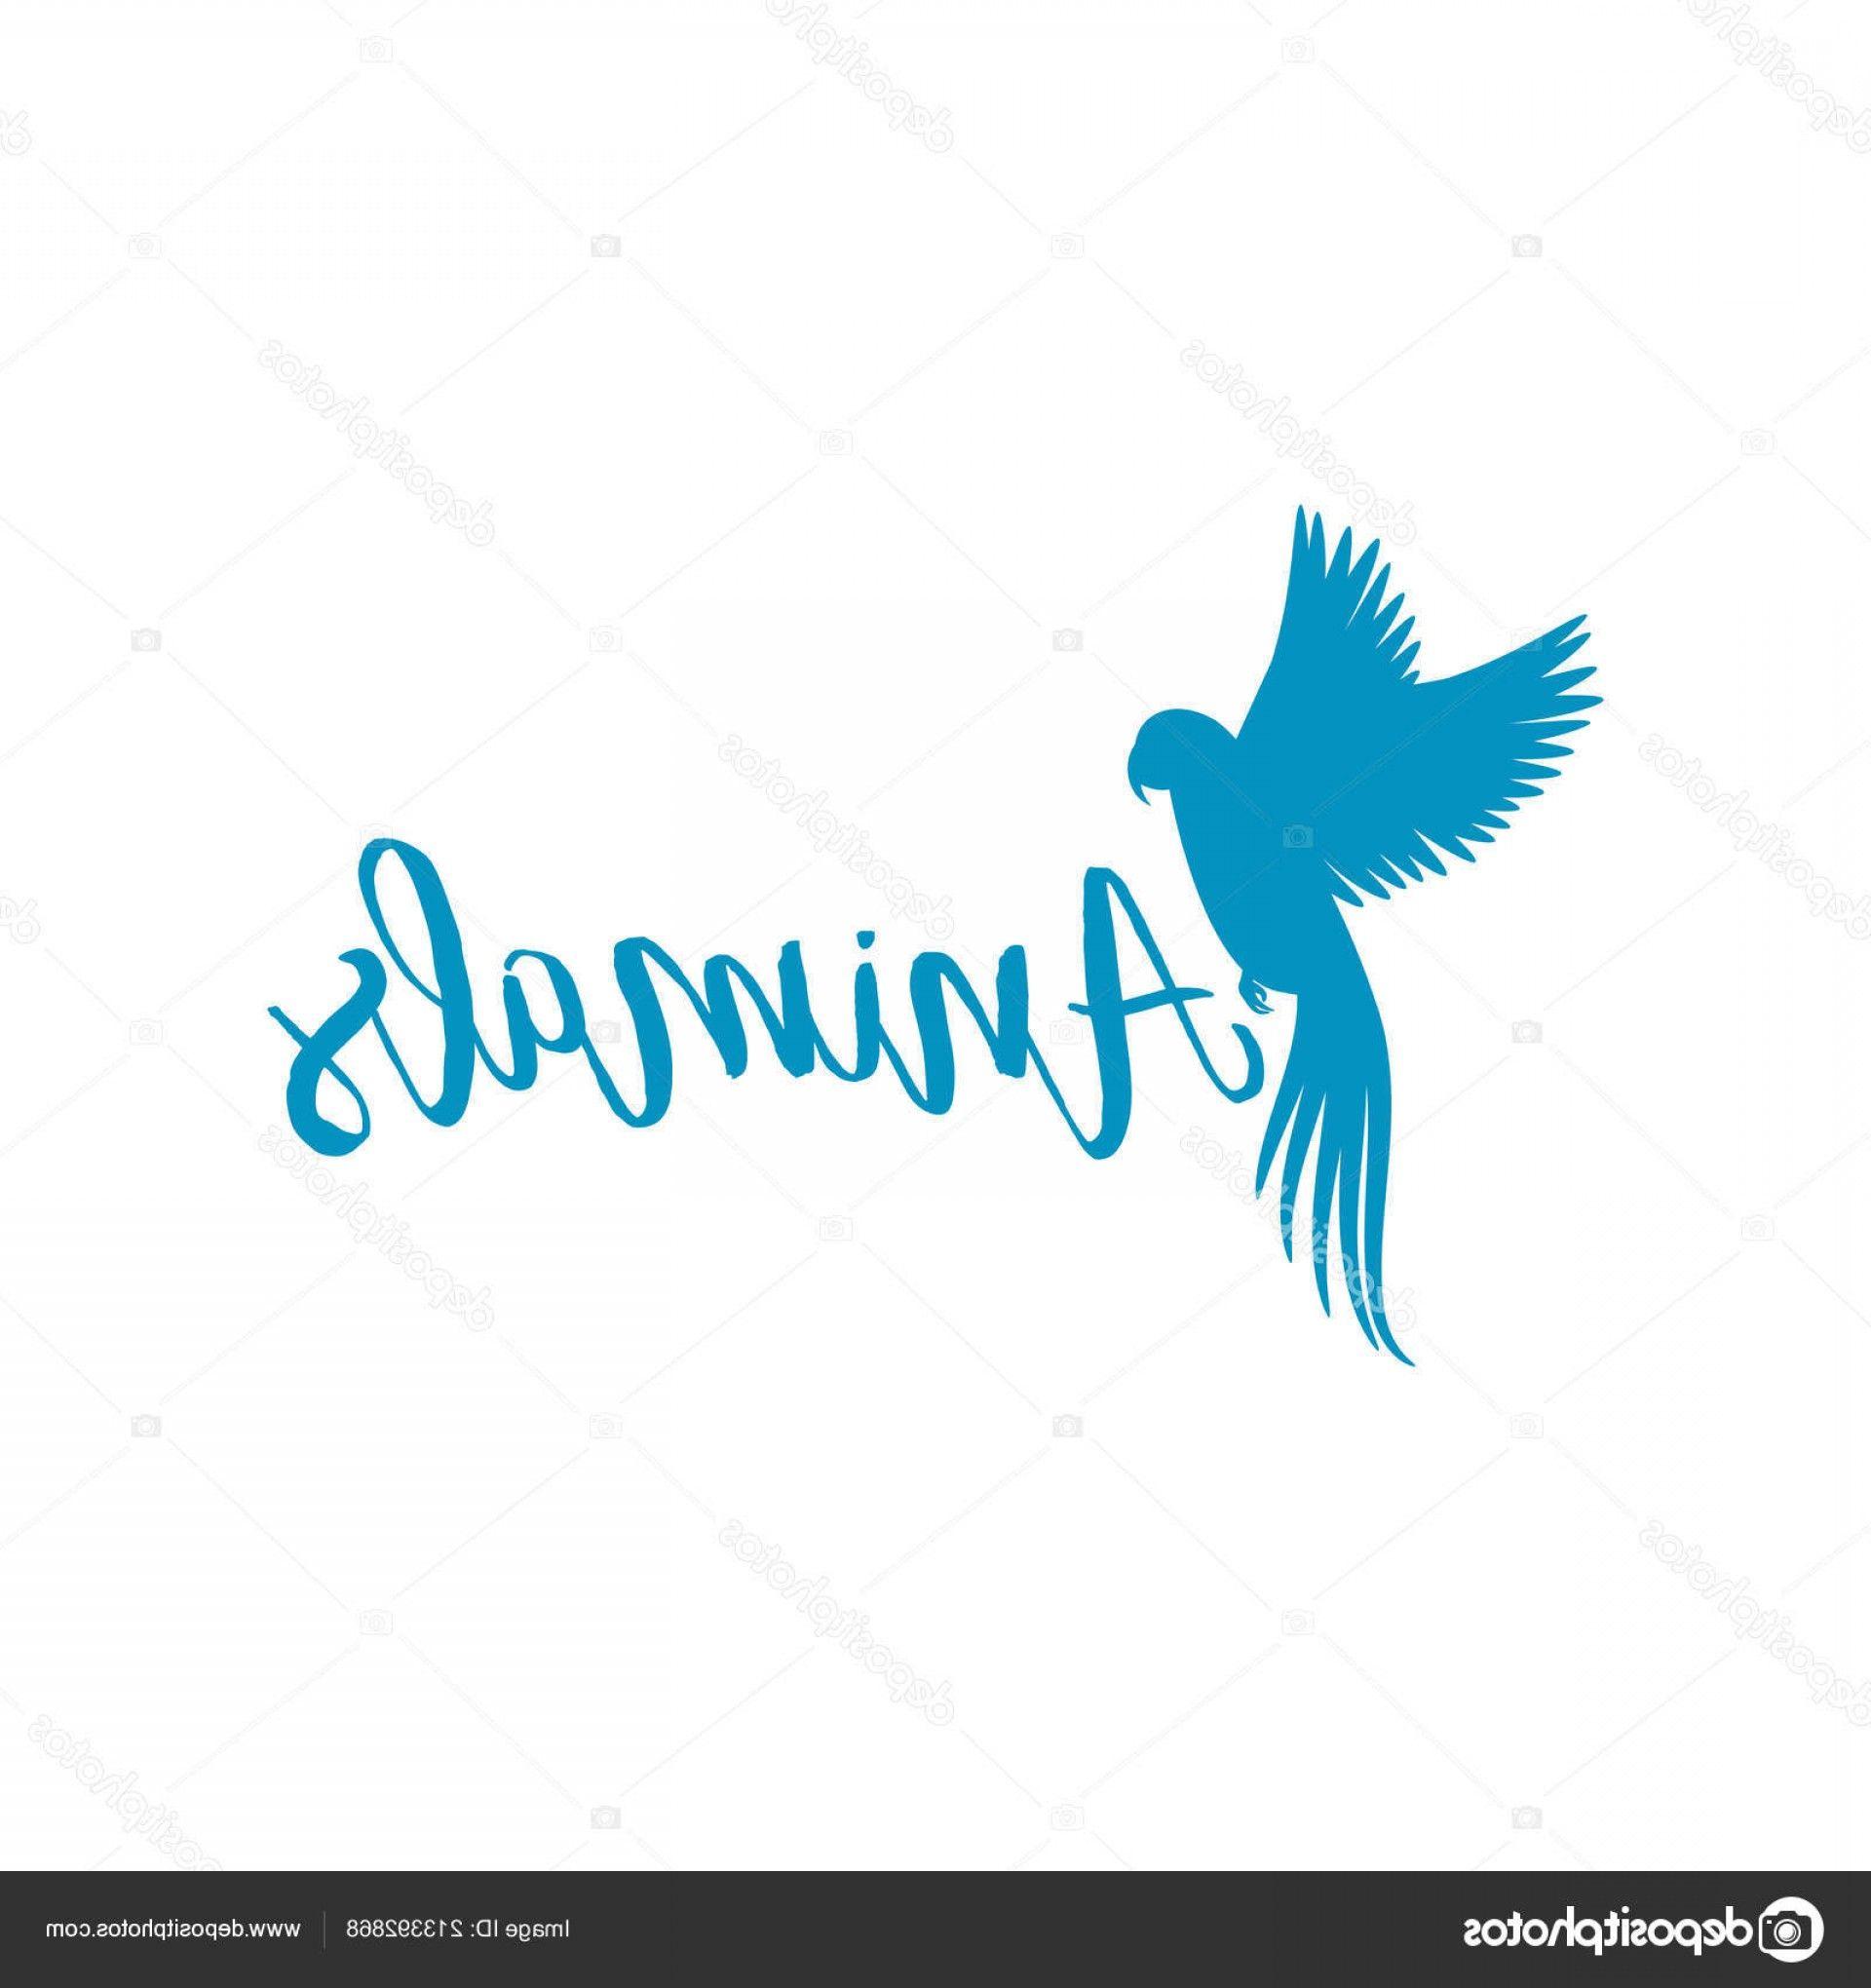 Flying Animals Logo - Stock Illustration Animals Logo Template With Flying | GeekChicPro